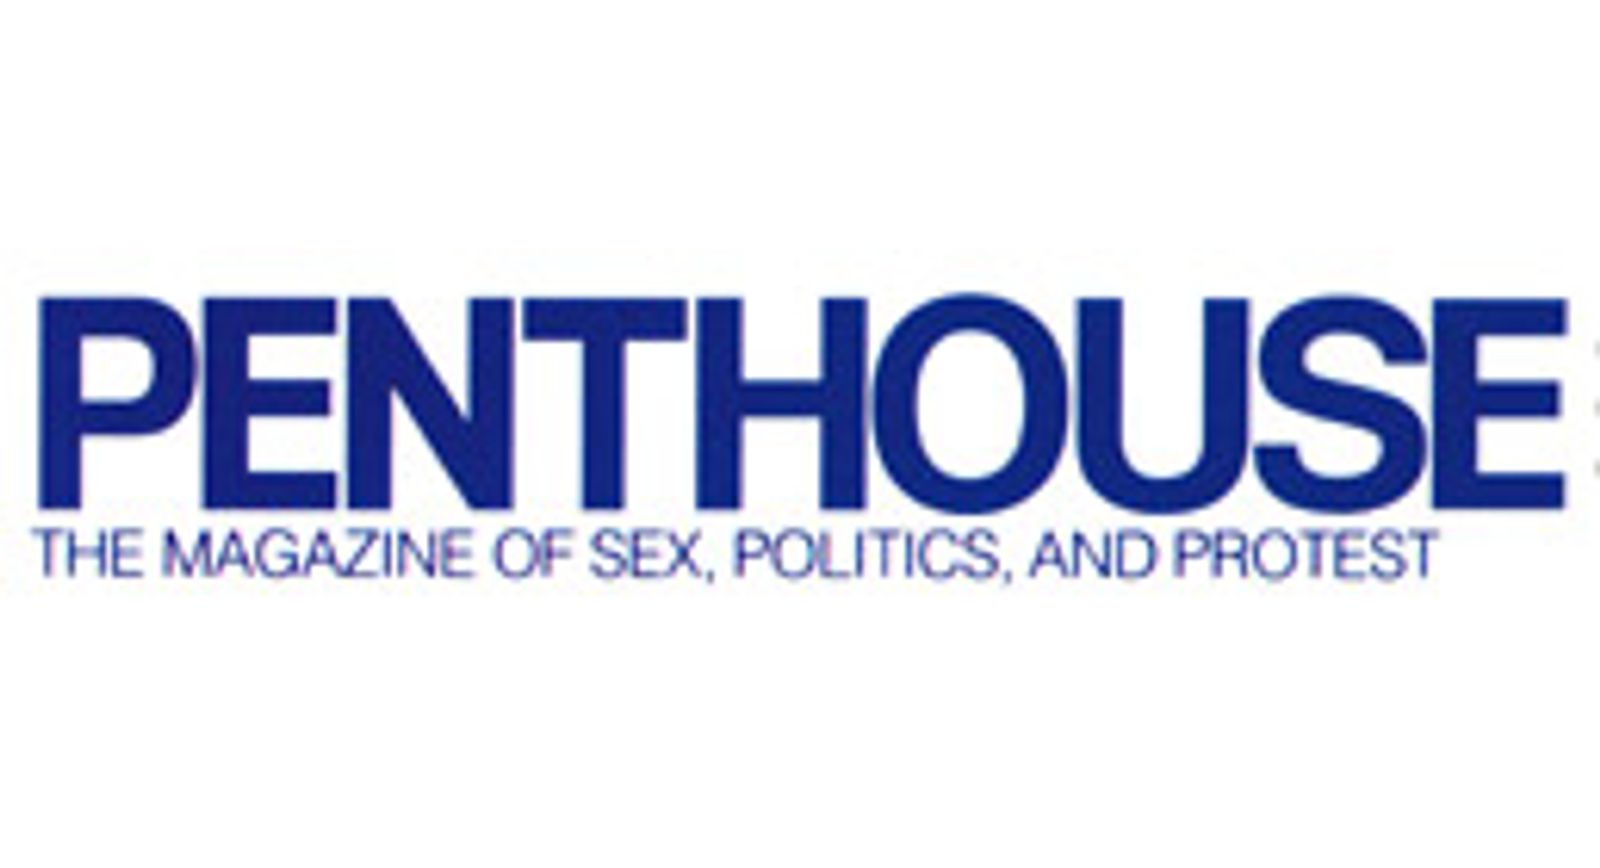 Penthouse Still Alive, Printing August Issue